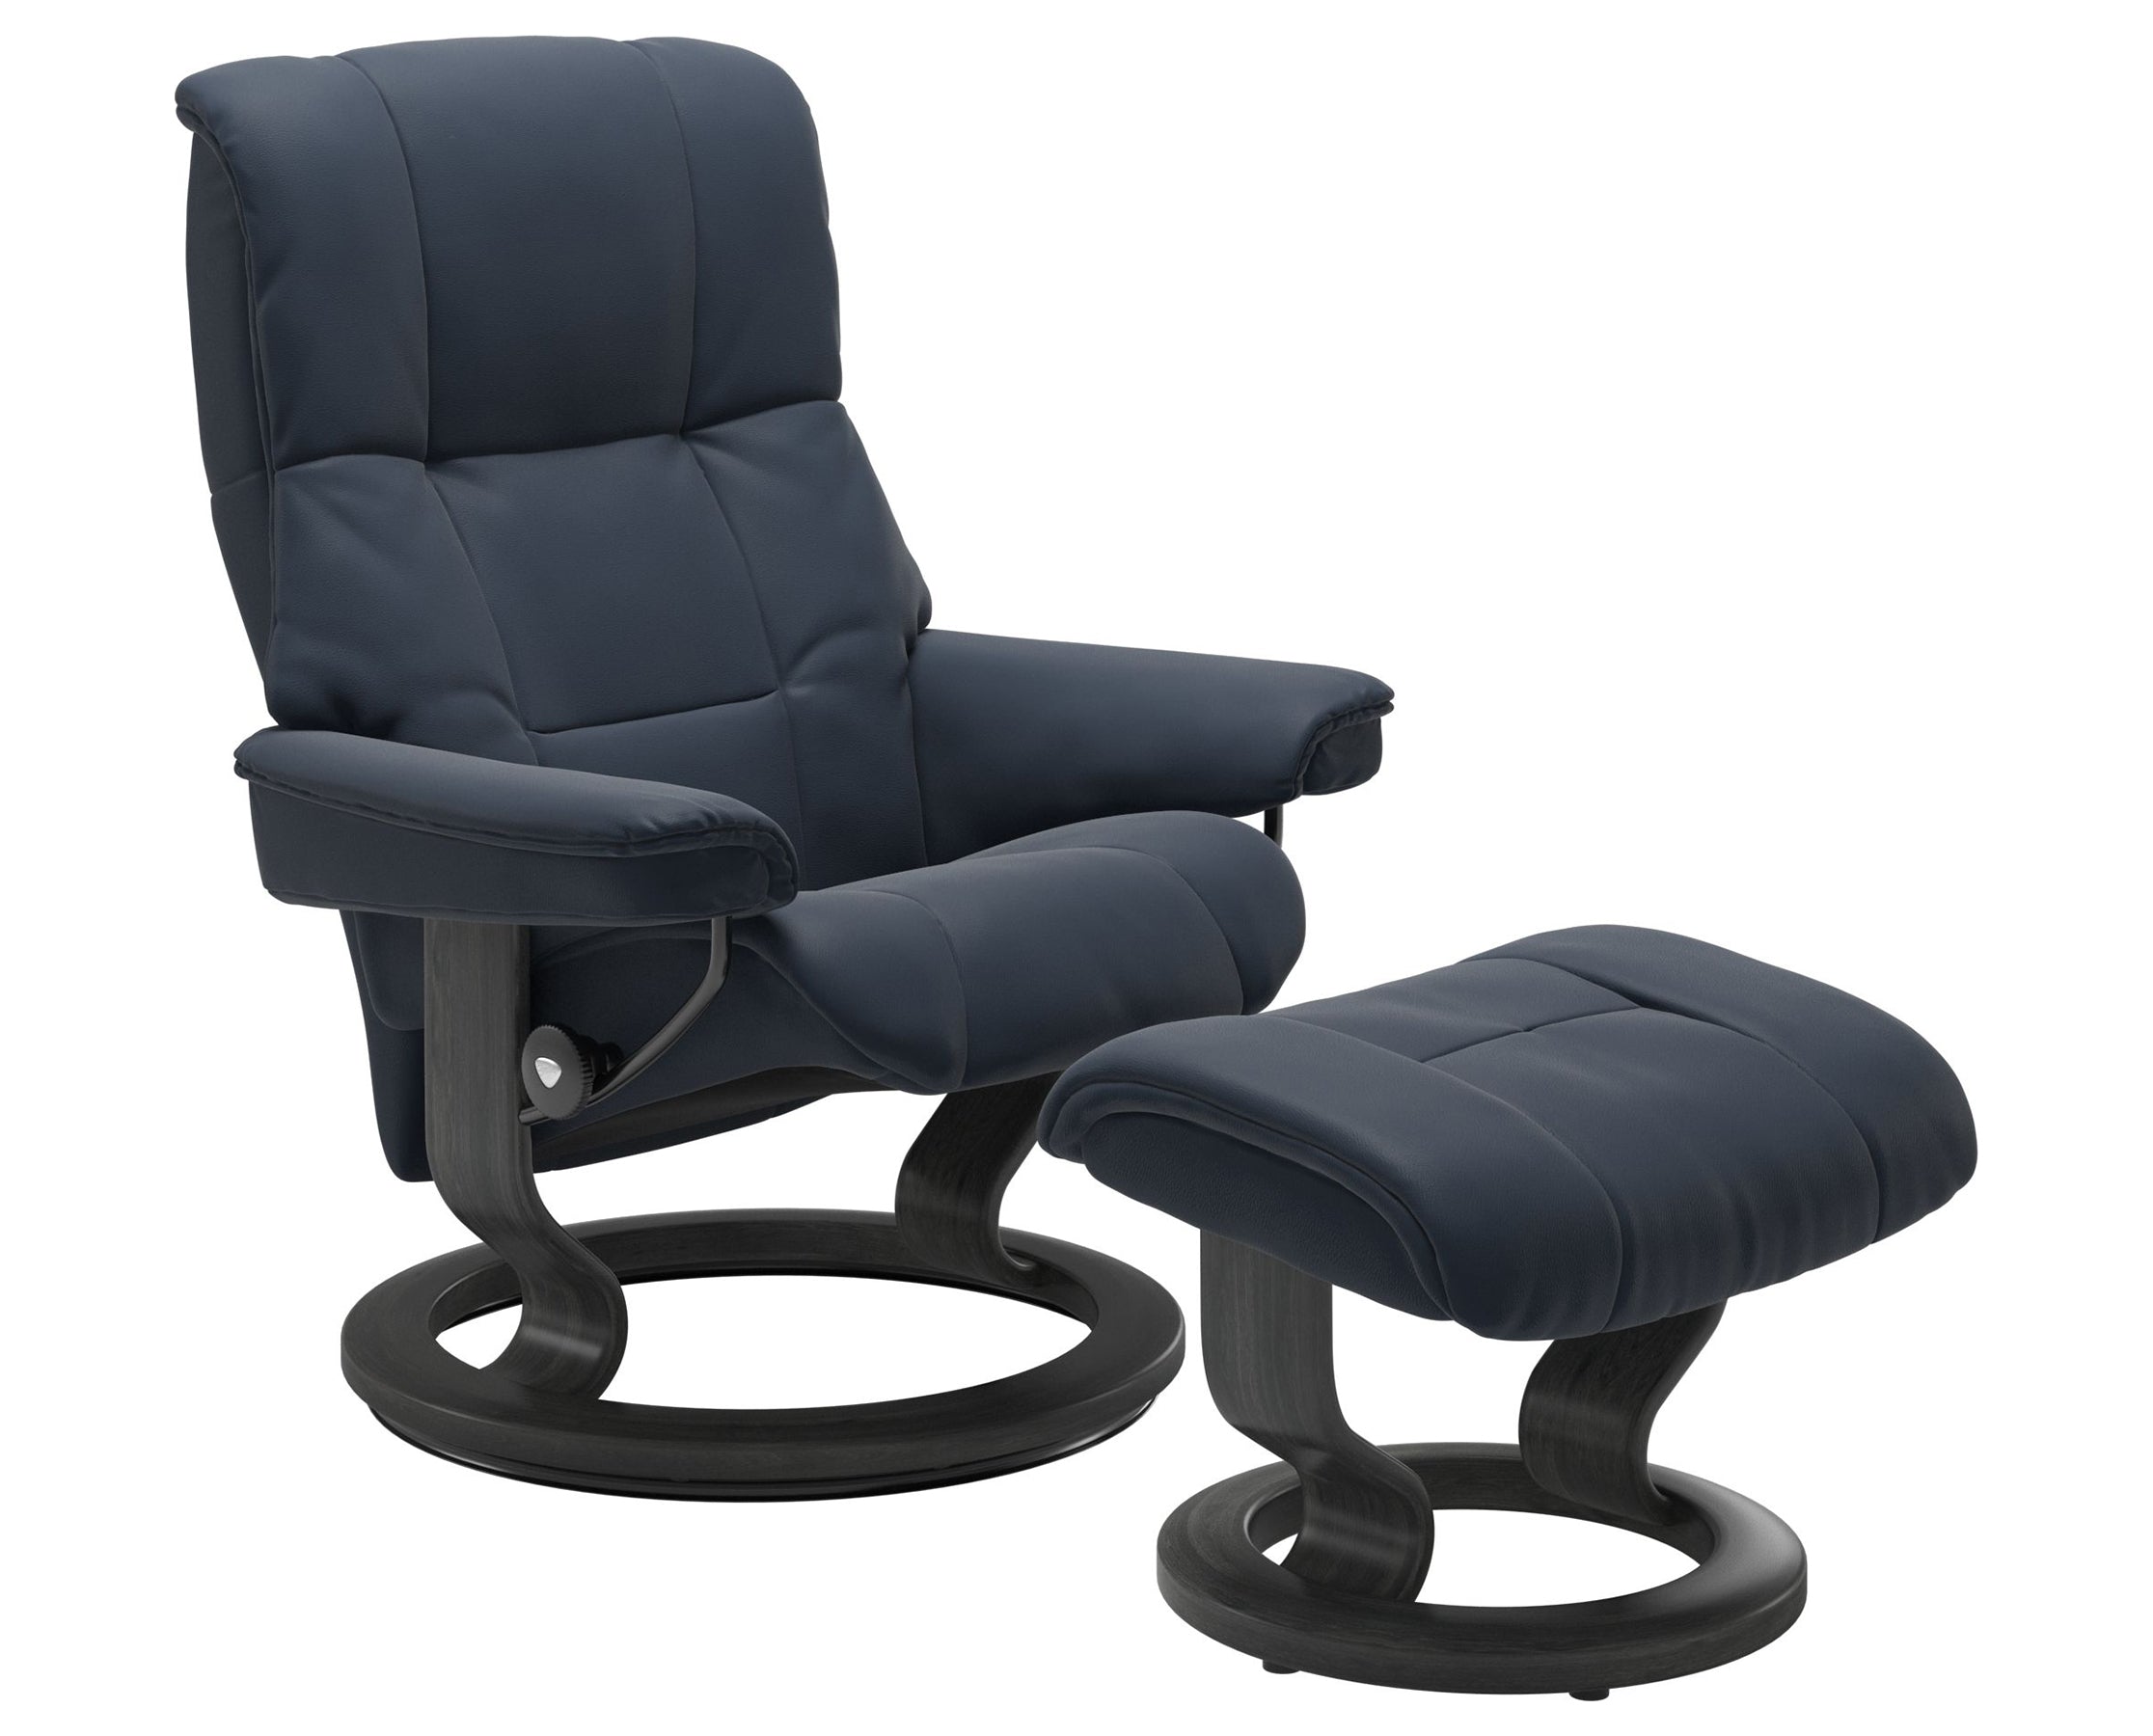 Paloma Leather Oxford Blue S/M/L and Grey Base | Stressless Mayfair Classic Recliner | Valley Ridge Furniture